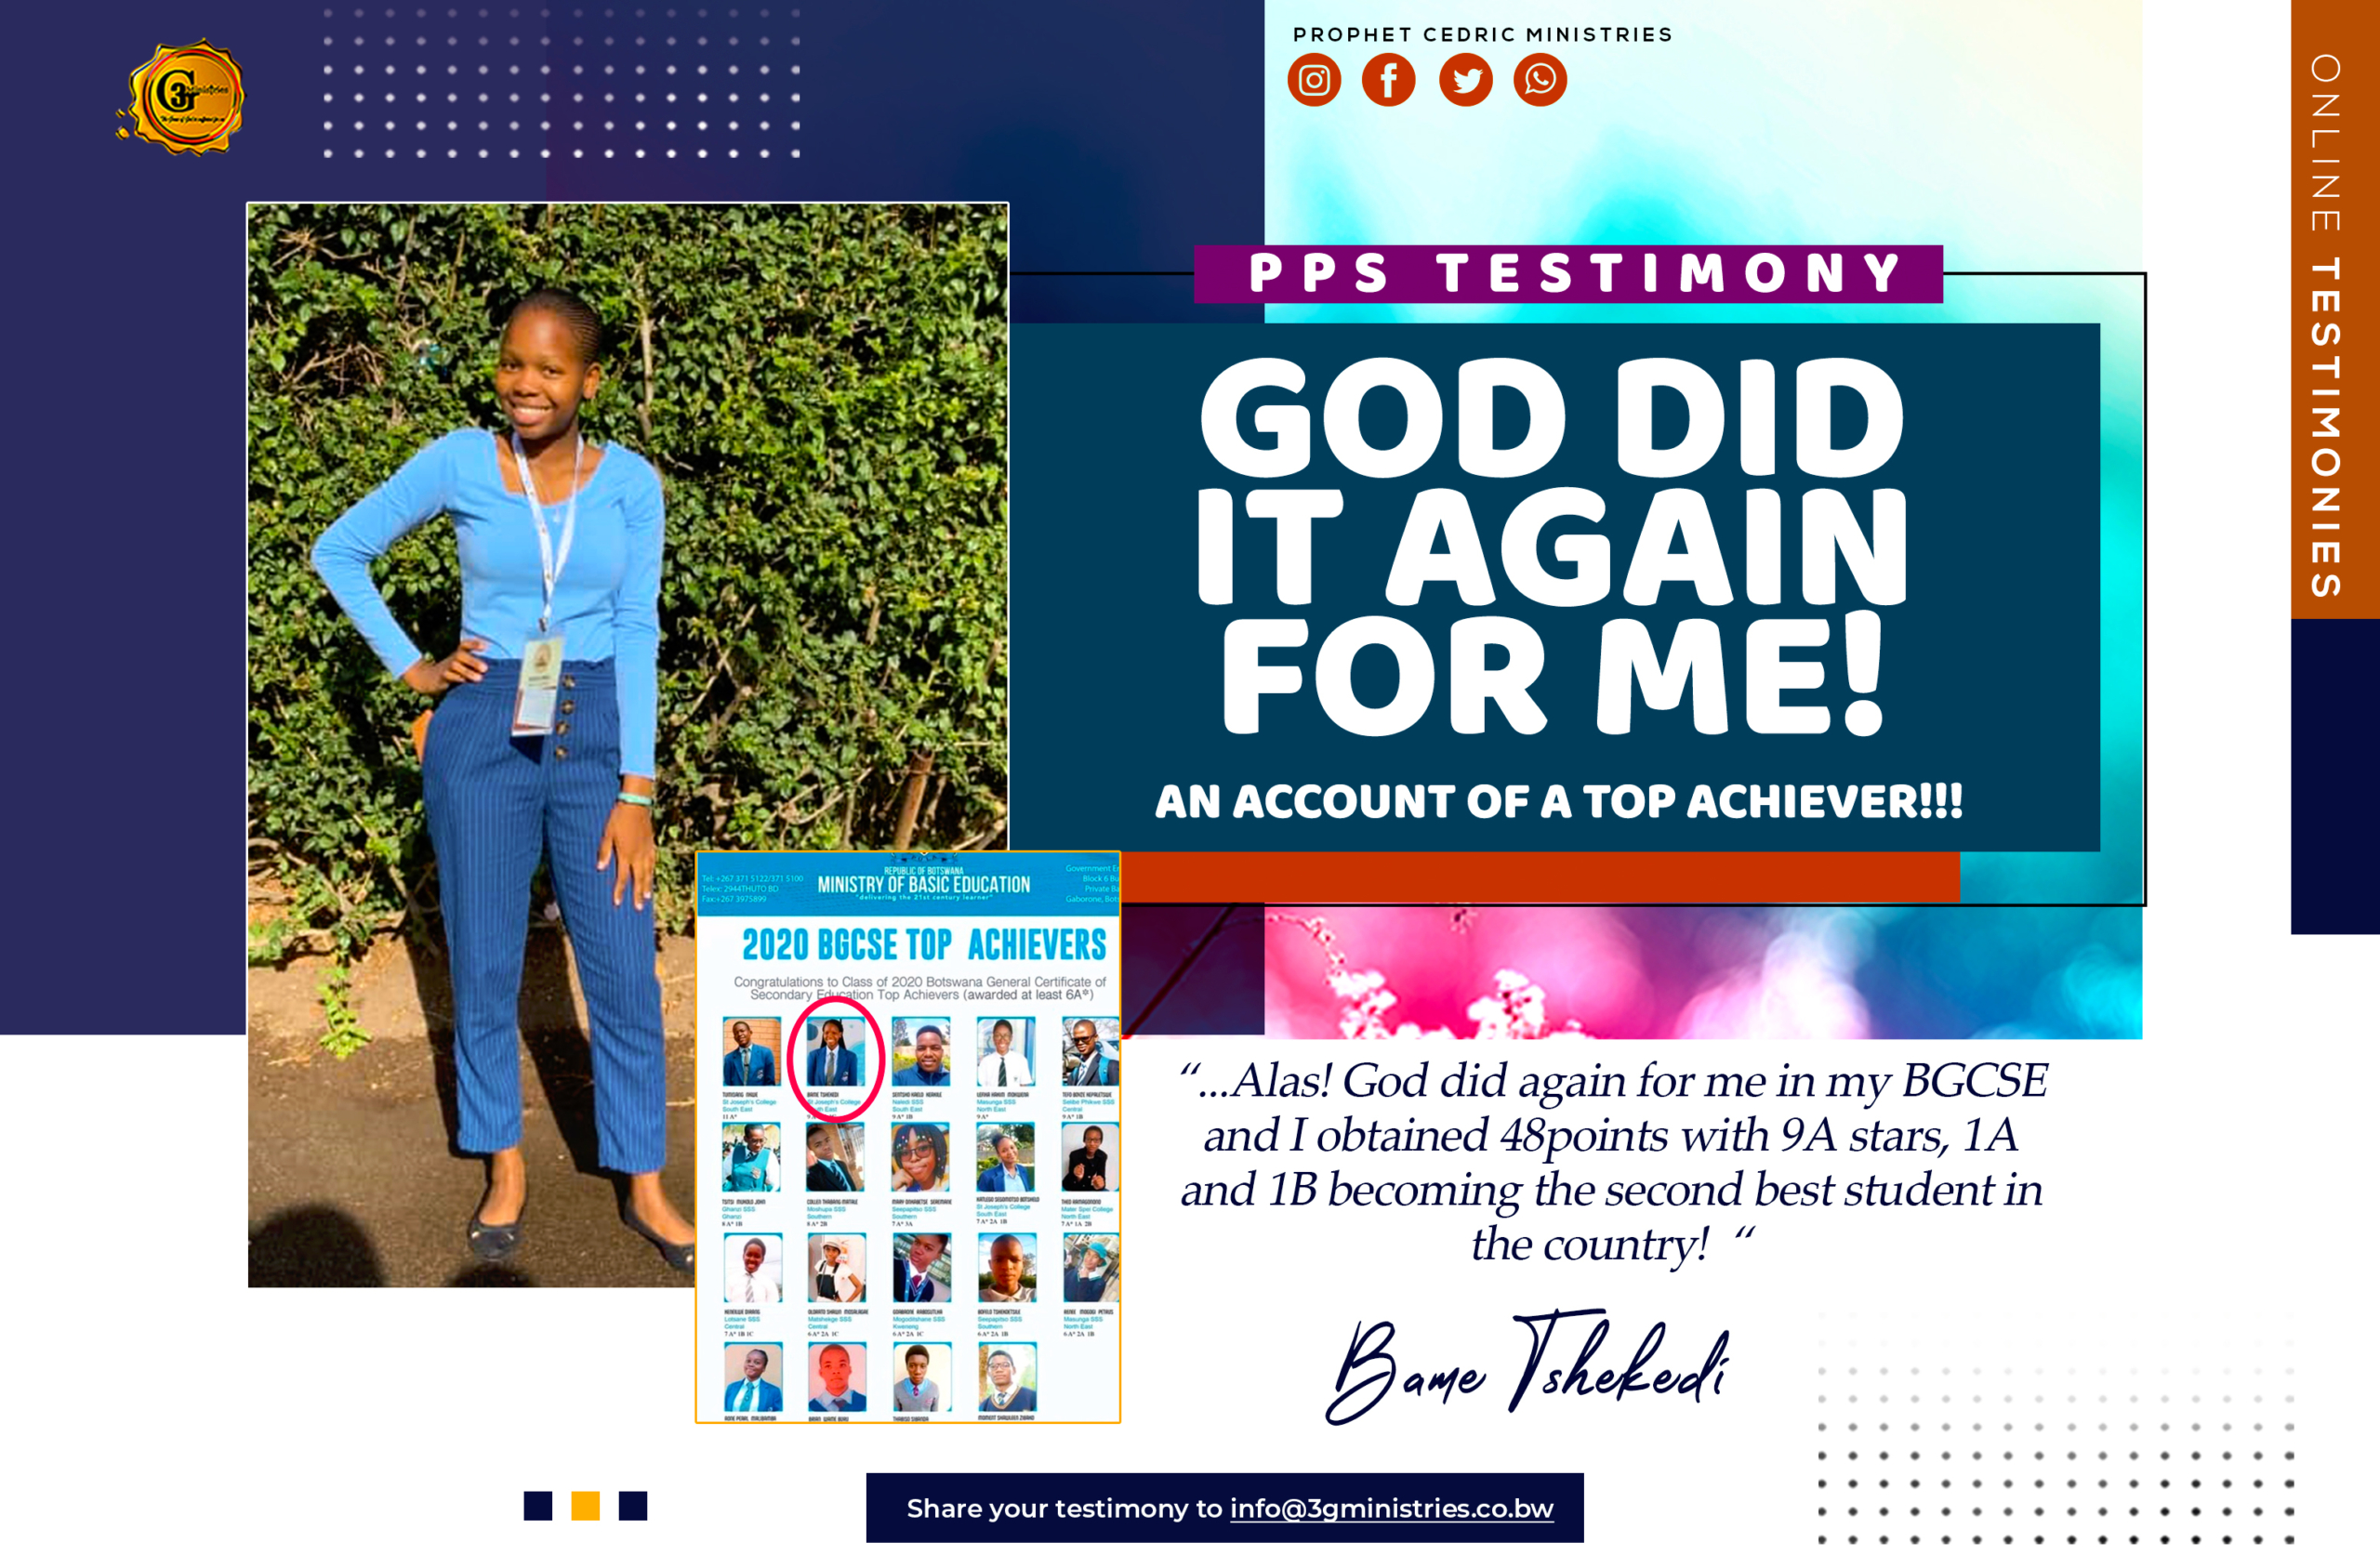 GOD DID AGAIN FOR ME!- An account of a top achiever